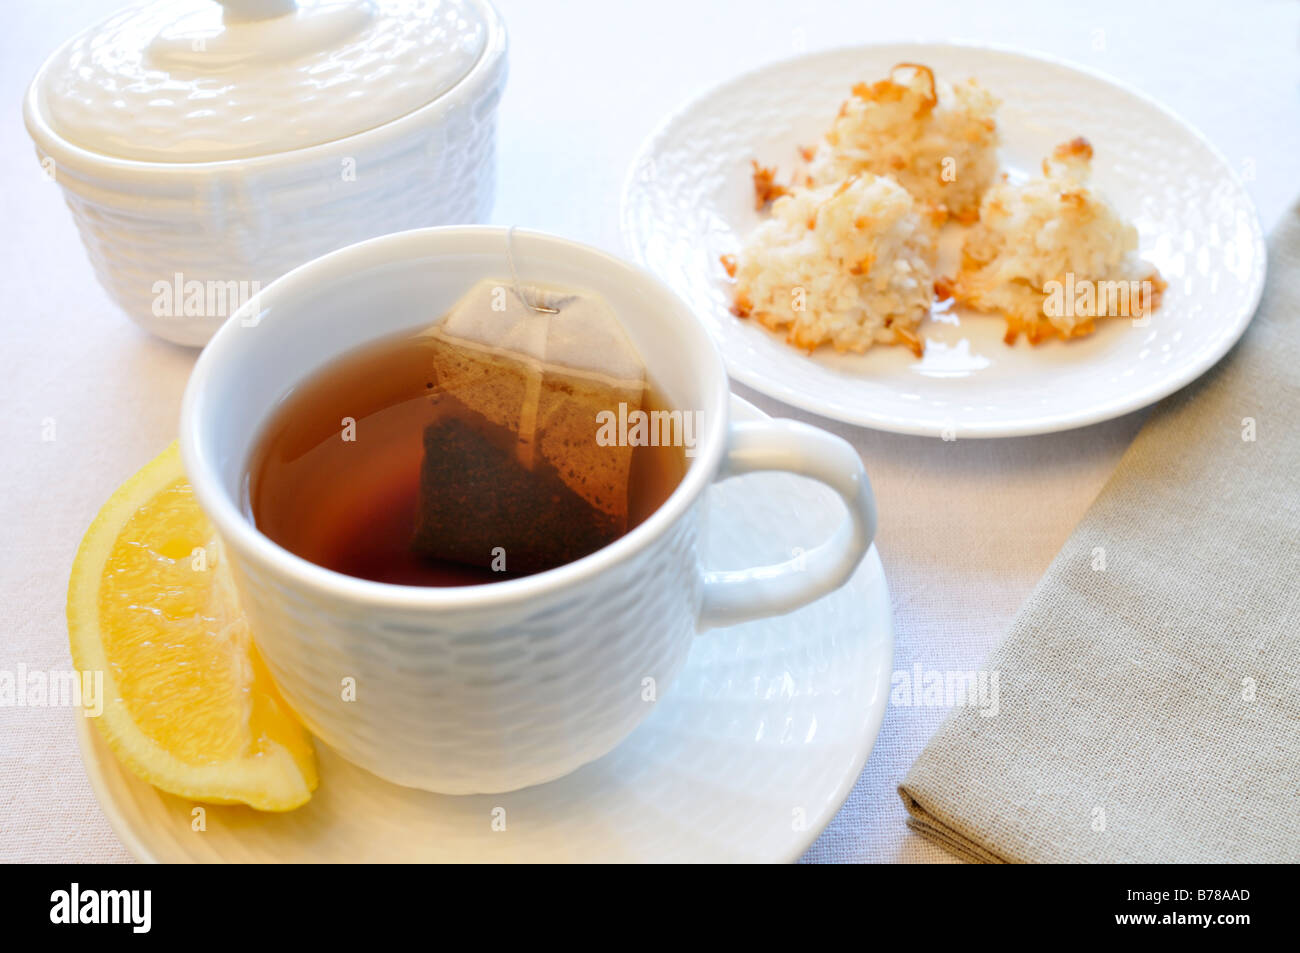 A cup of Black tea with a slice of lemon, sugar bowl and plate of coconut macaroon cookies with a  napkin on white background. Stock Photo